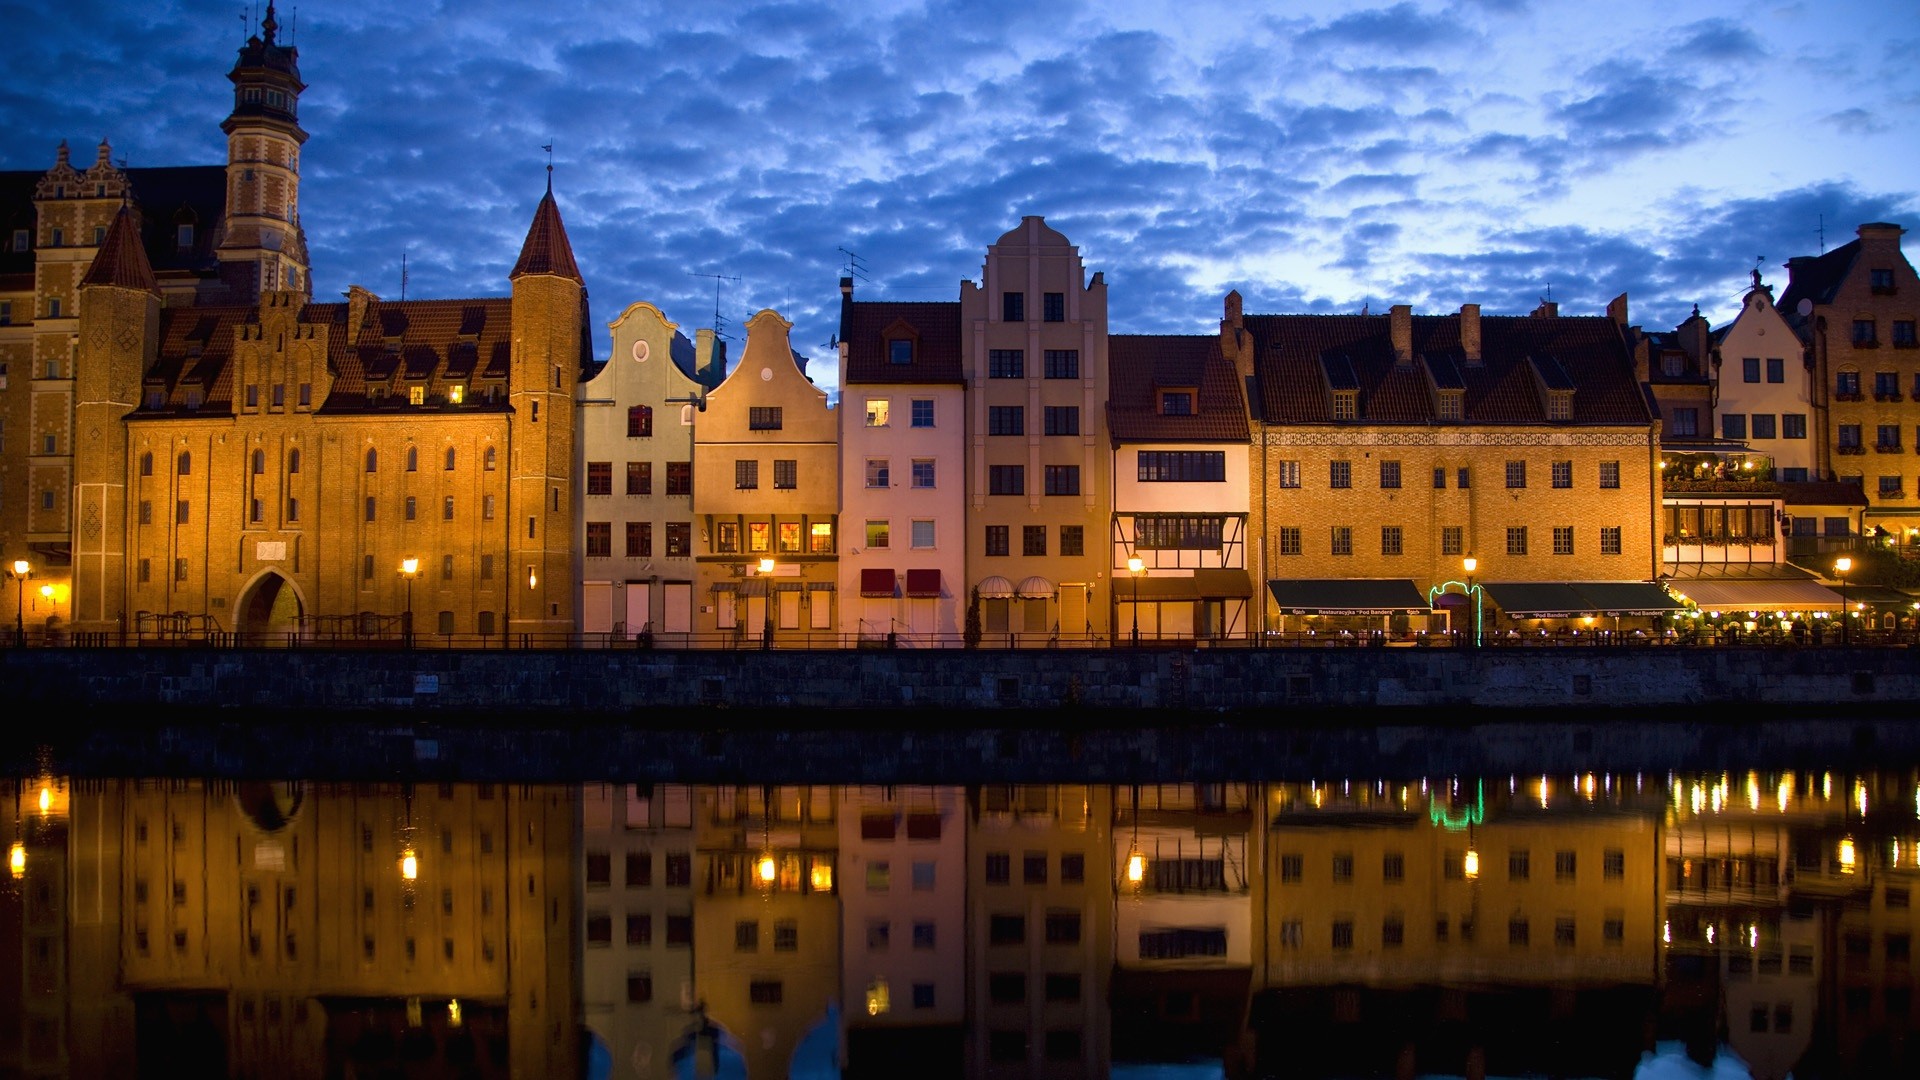 city, Building, Architecture, Reflection, River, Water, Clouds, Night, Lights, Gdańsk, Poland, Symmetry Wallpaper